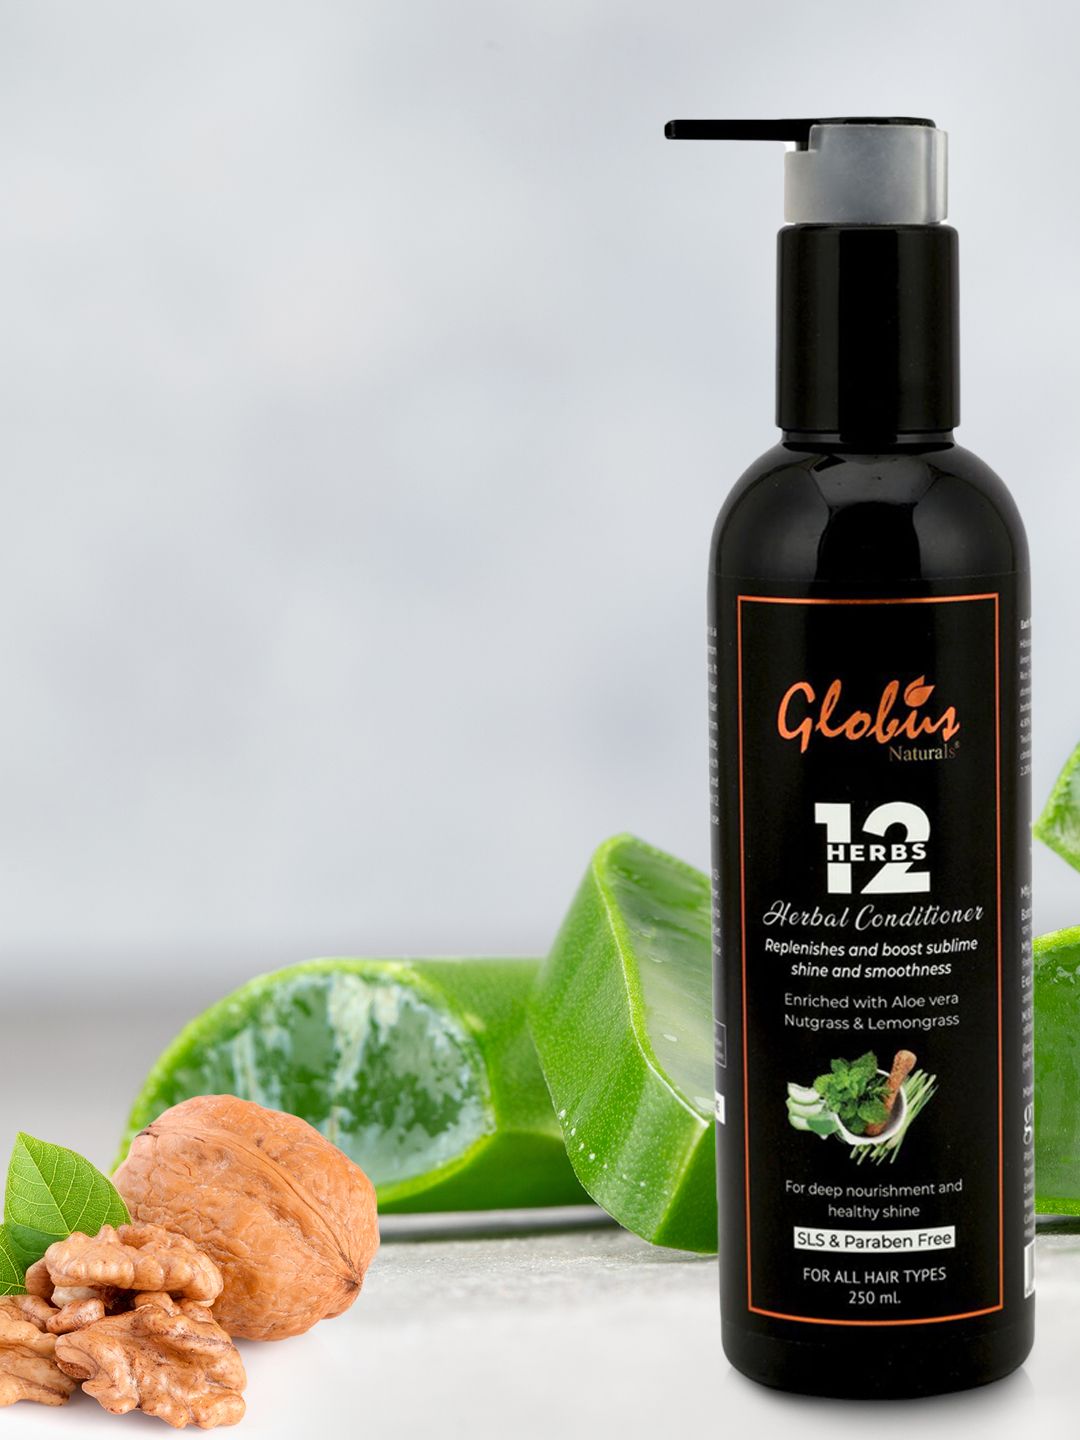 Globus Naturals 12 Herbs Hair Growth Conditioner 250 ml Price in India